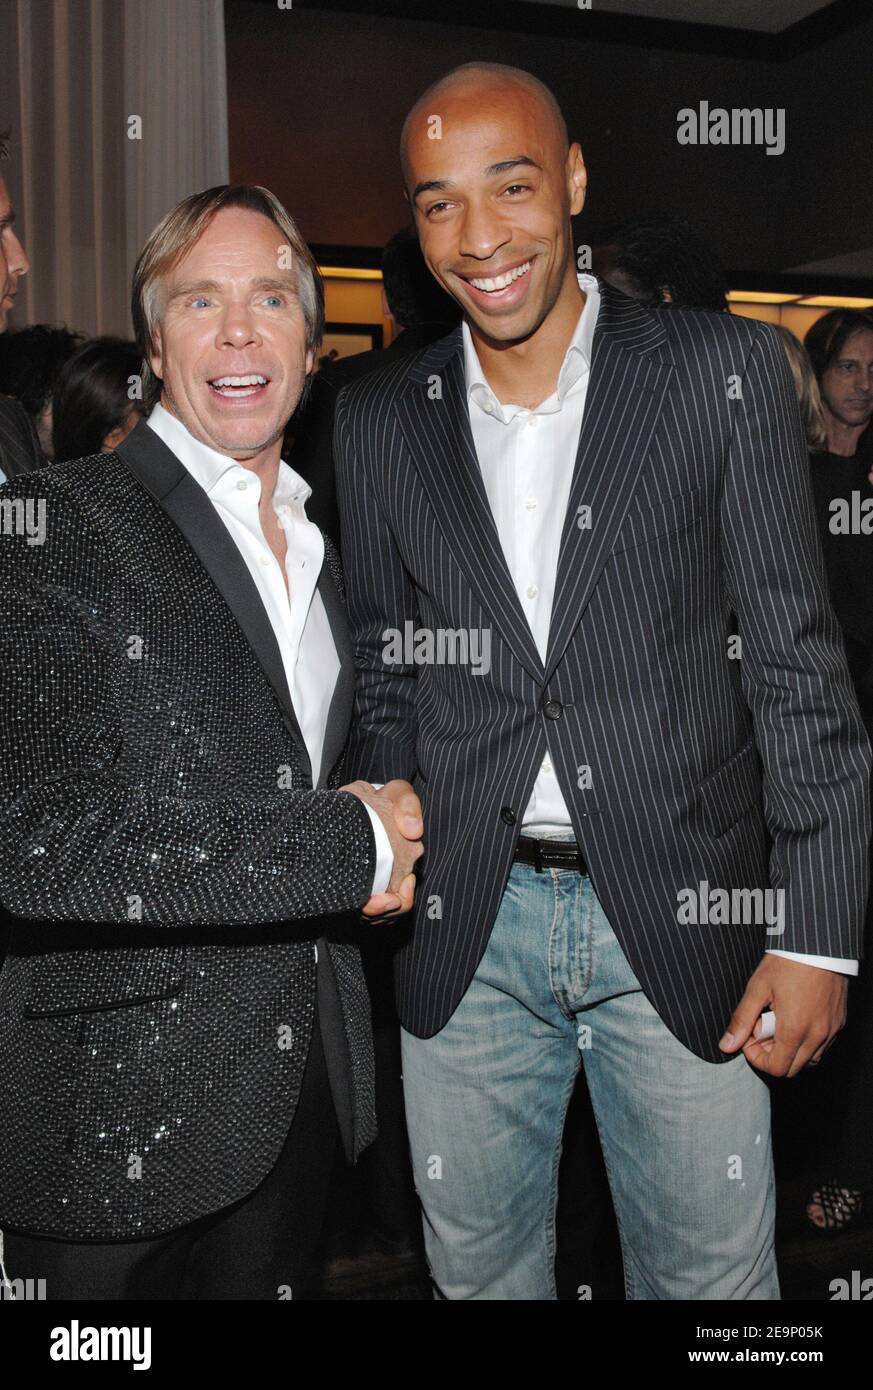 US Fashion designer Tommy Hilfiger poses with French soccer superstar Thierry  Henry during the opening party for Tommy Hilfiger's flagship store in  Paris, France, on October 18, 2006. The store, located on